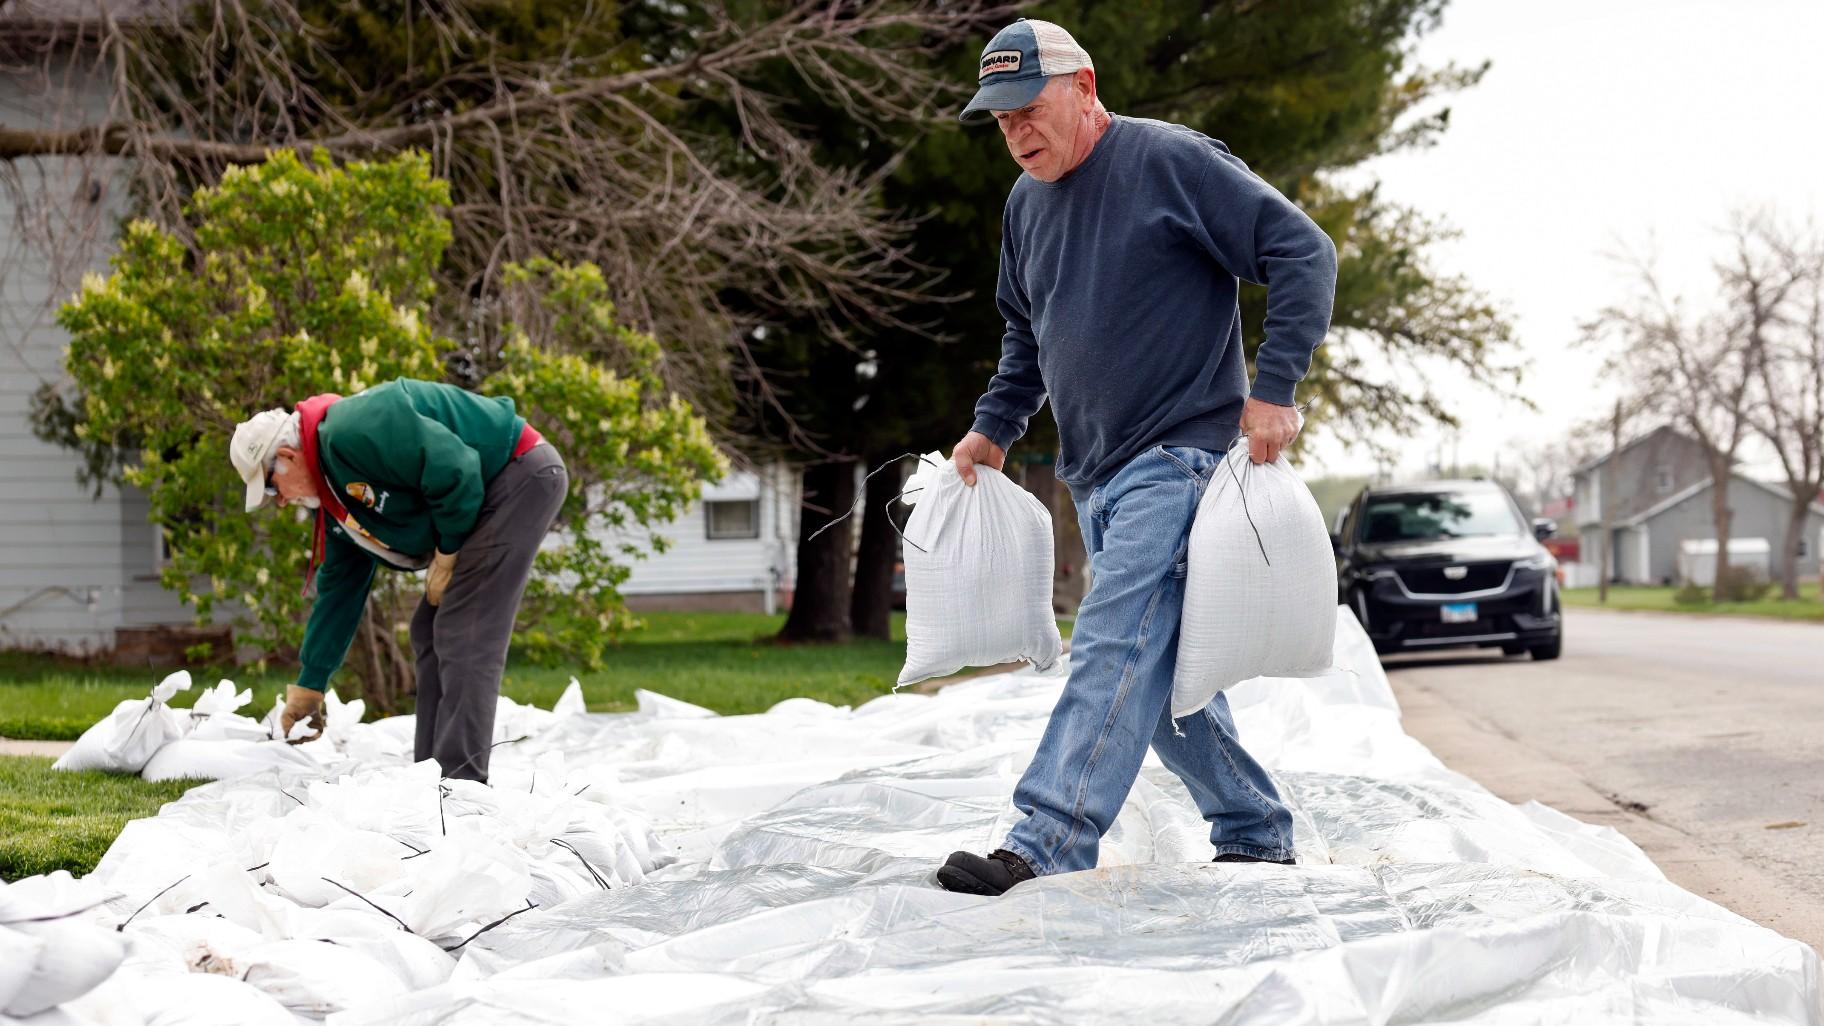 Sparky Donahue place sandbags outside a home on Second Street, Tuesday, April 25, 2023, in Buffalo, Iowa. The river front town, 20 minutes south of Davenport, Iowa, is preparing for flooding from the Mississippi River.(Nikos Frazier / Quad City Times via AP)